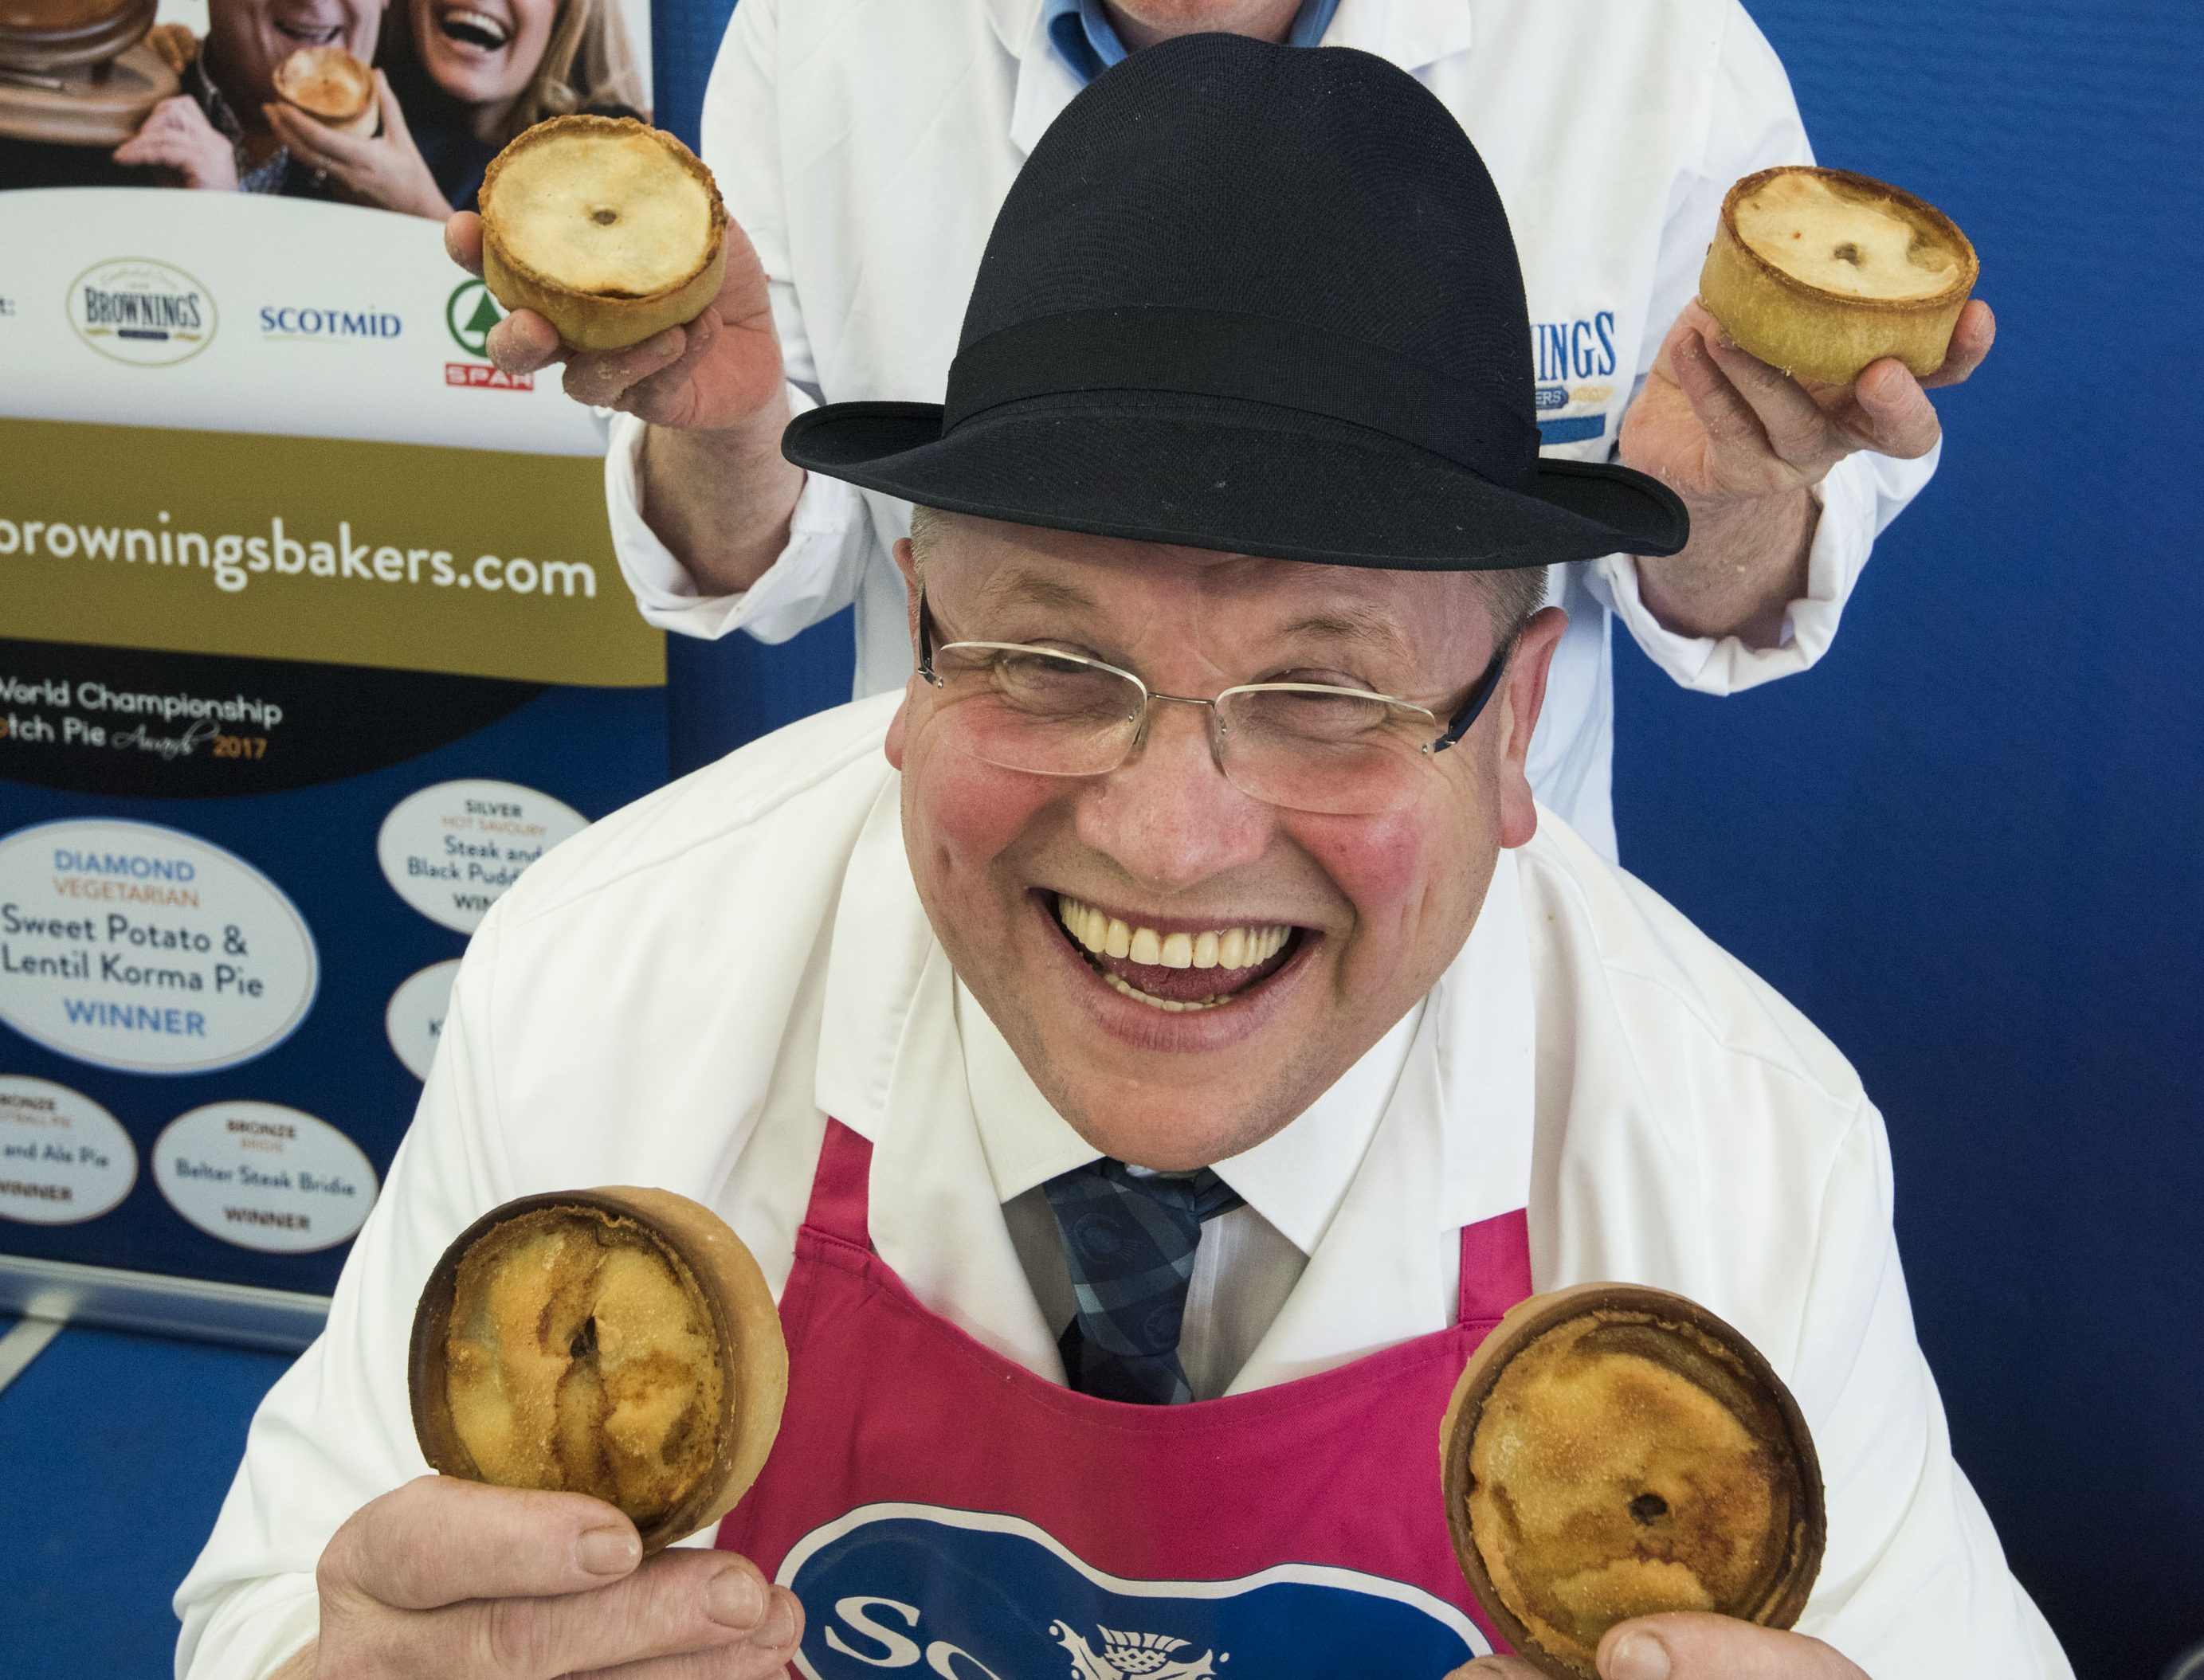 The pies have it! Paul Boyle, front, beat John Gall to the Best Pie title.